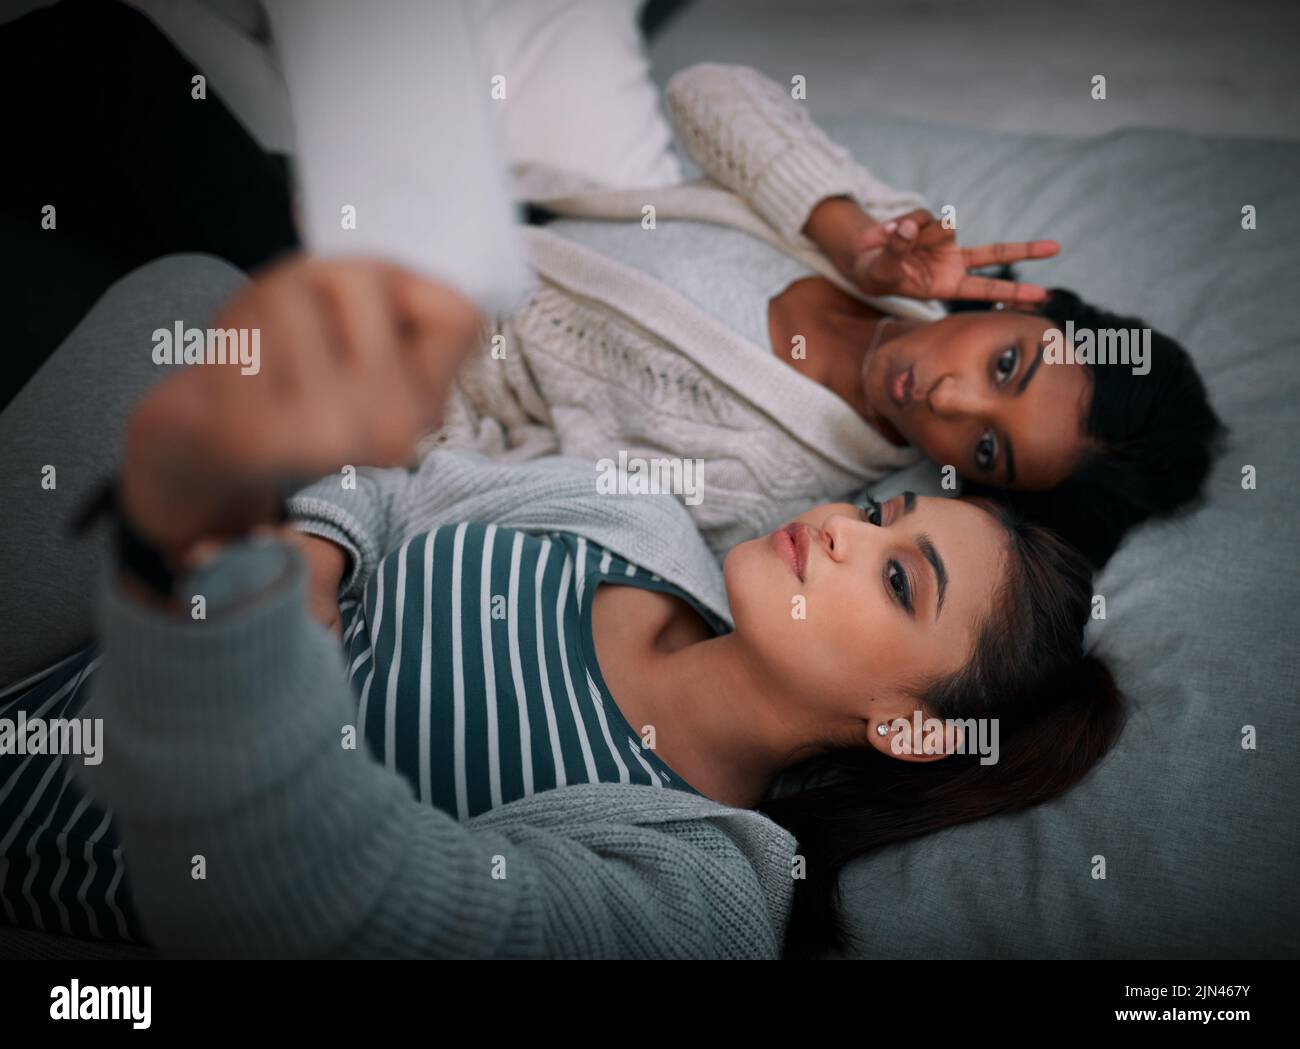 Its never too late for a selfie. two young women lying taking selfies while lying on a bed. Stock Photo